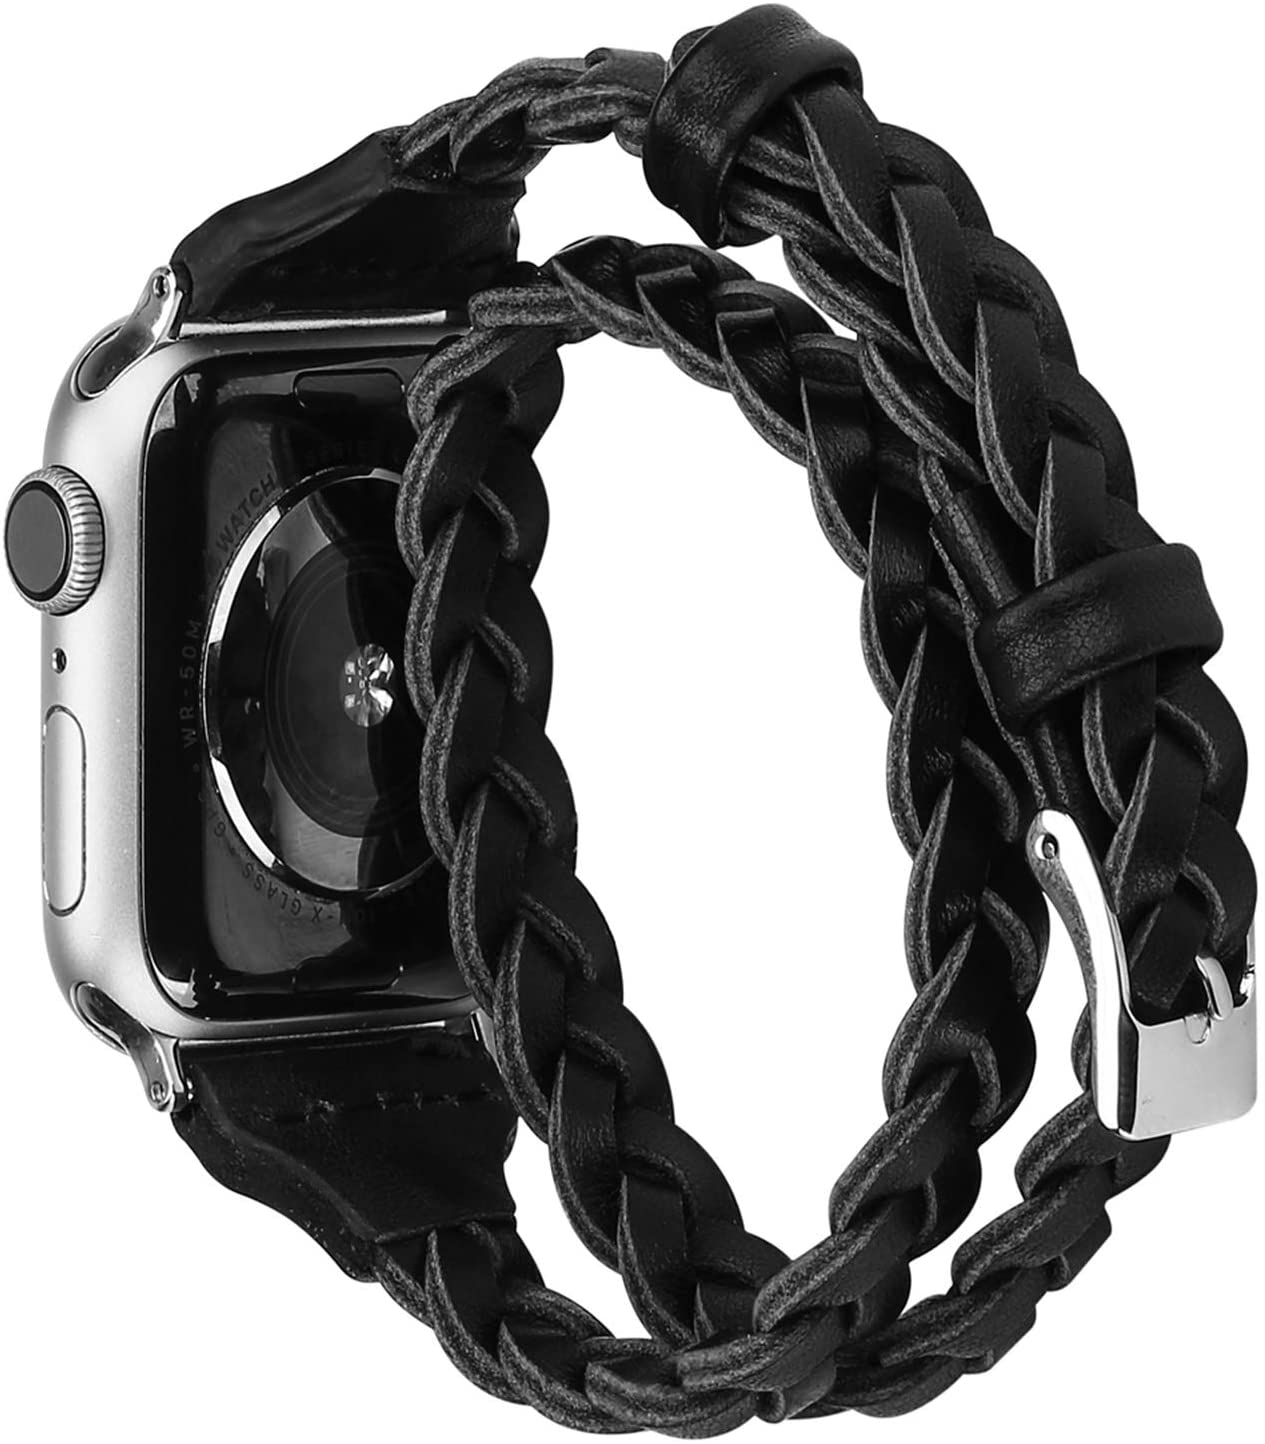 Wearlizer Double Wrap Gift Band Compatible with Apple Watch Bands 38mm 40mm Women - BLACK - e4cents